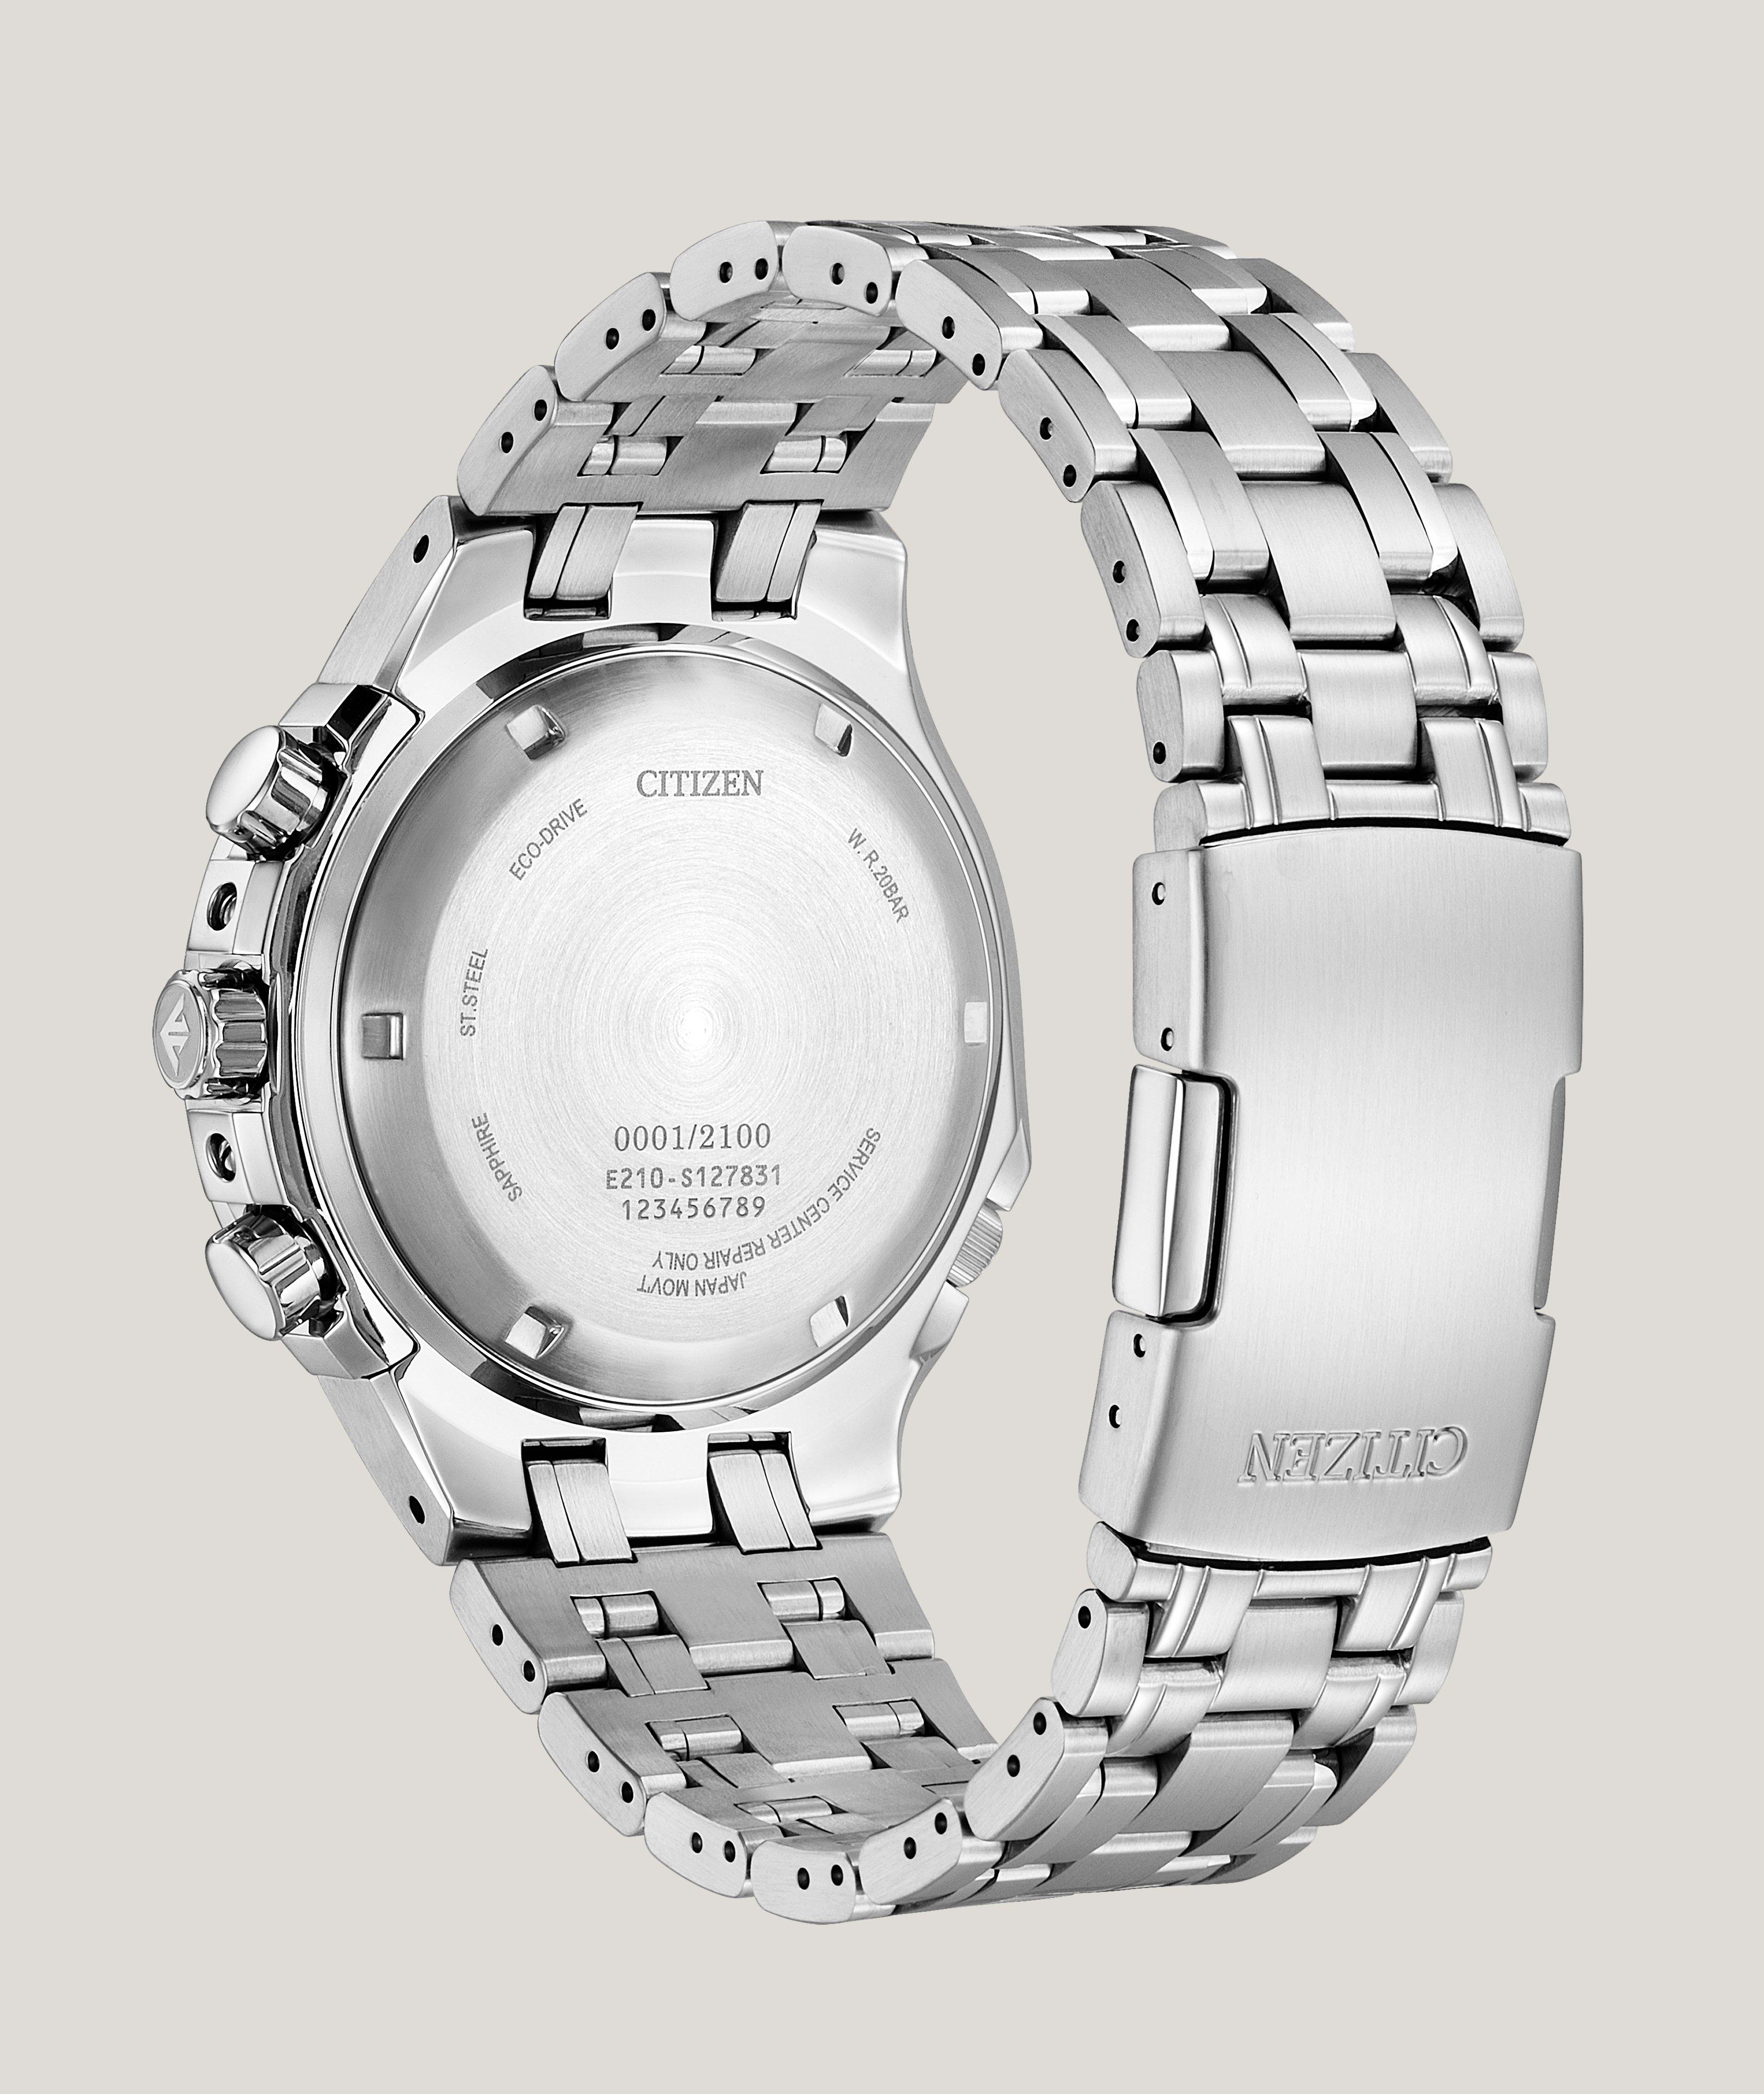  Limited Edition Caliber 2100 Eco-Drive Watch image 2